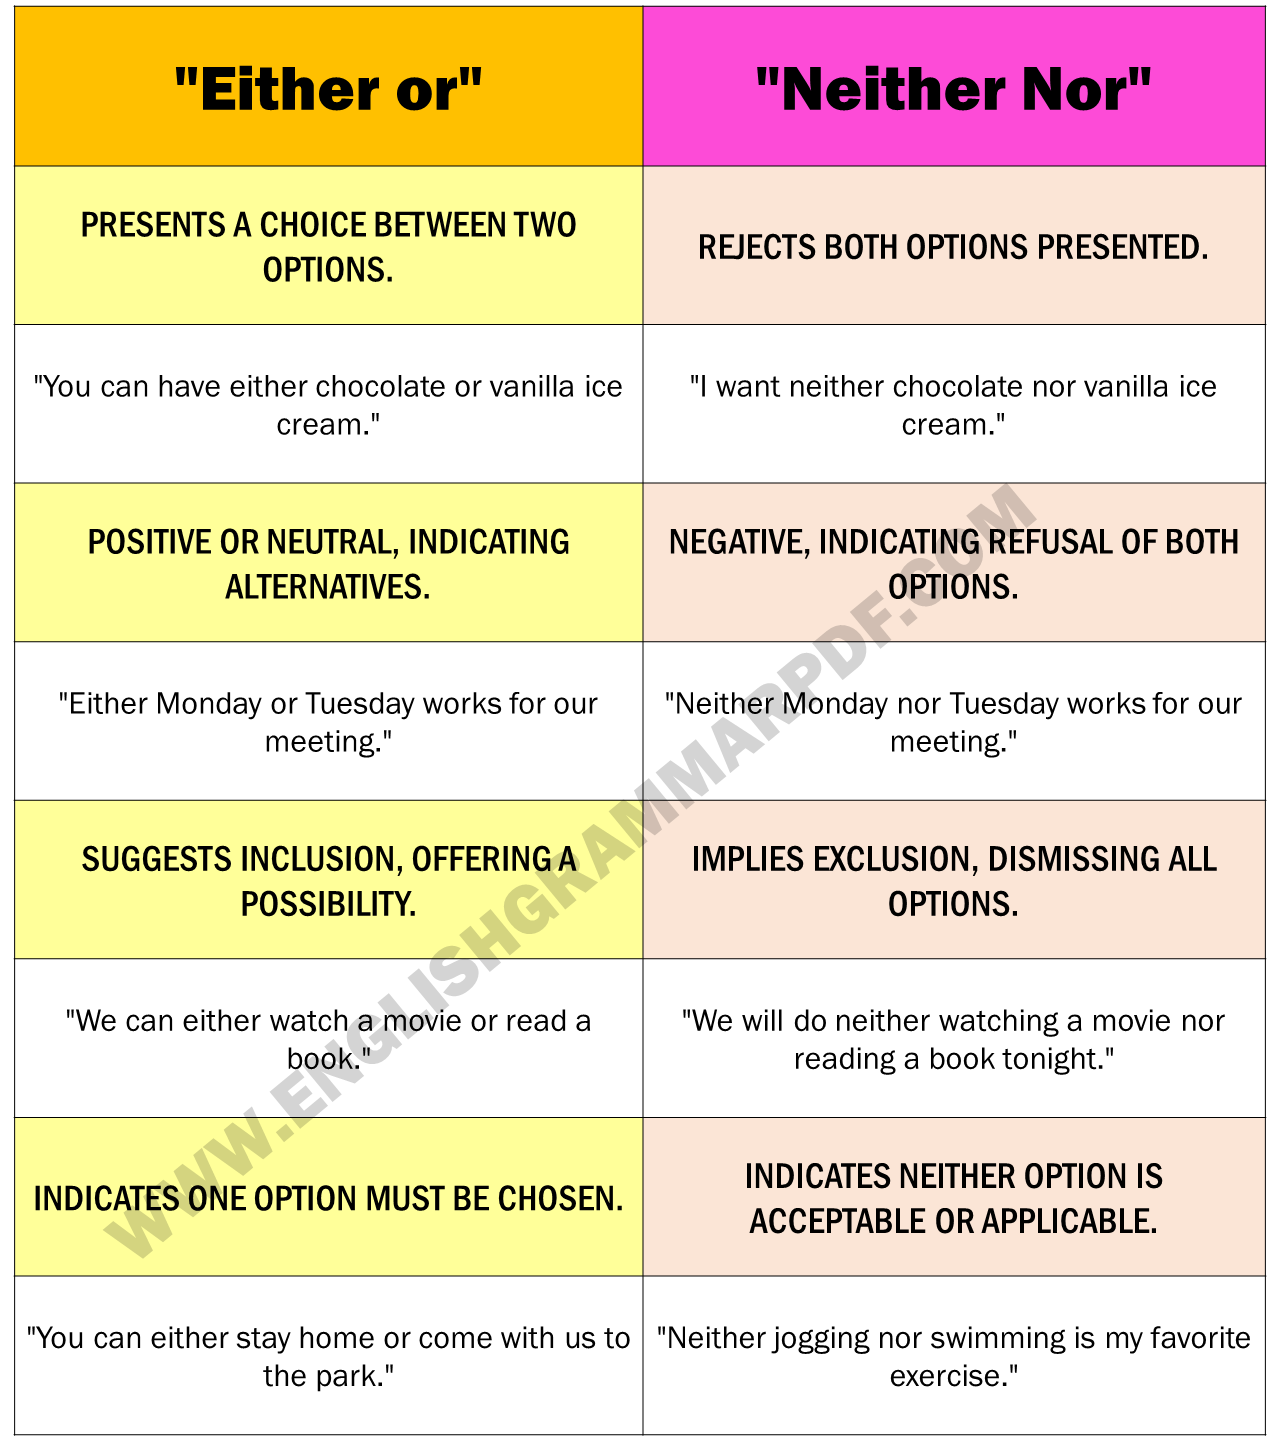 “Either or” vs “Neither Nor”